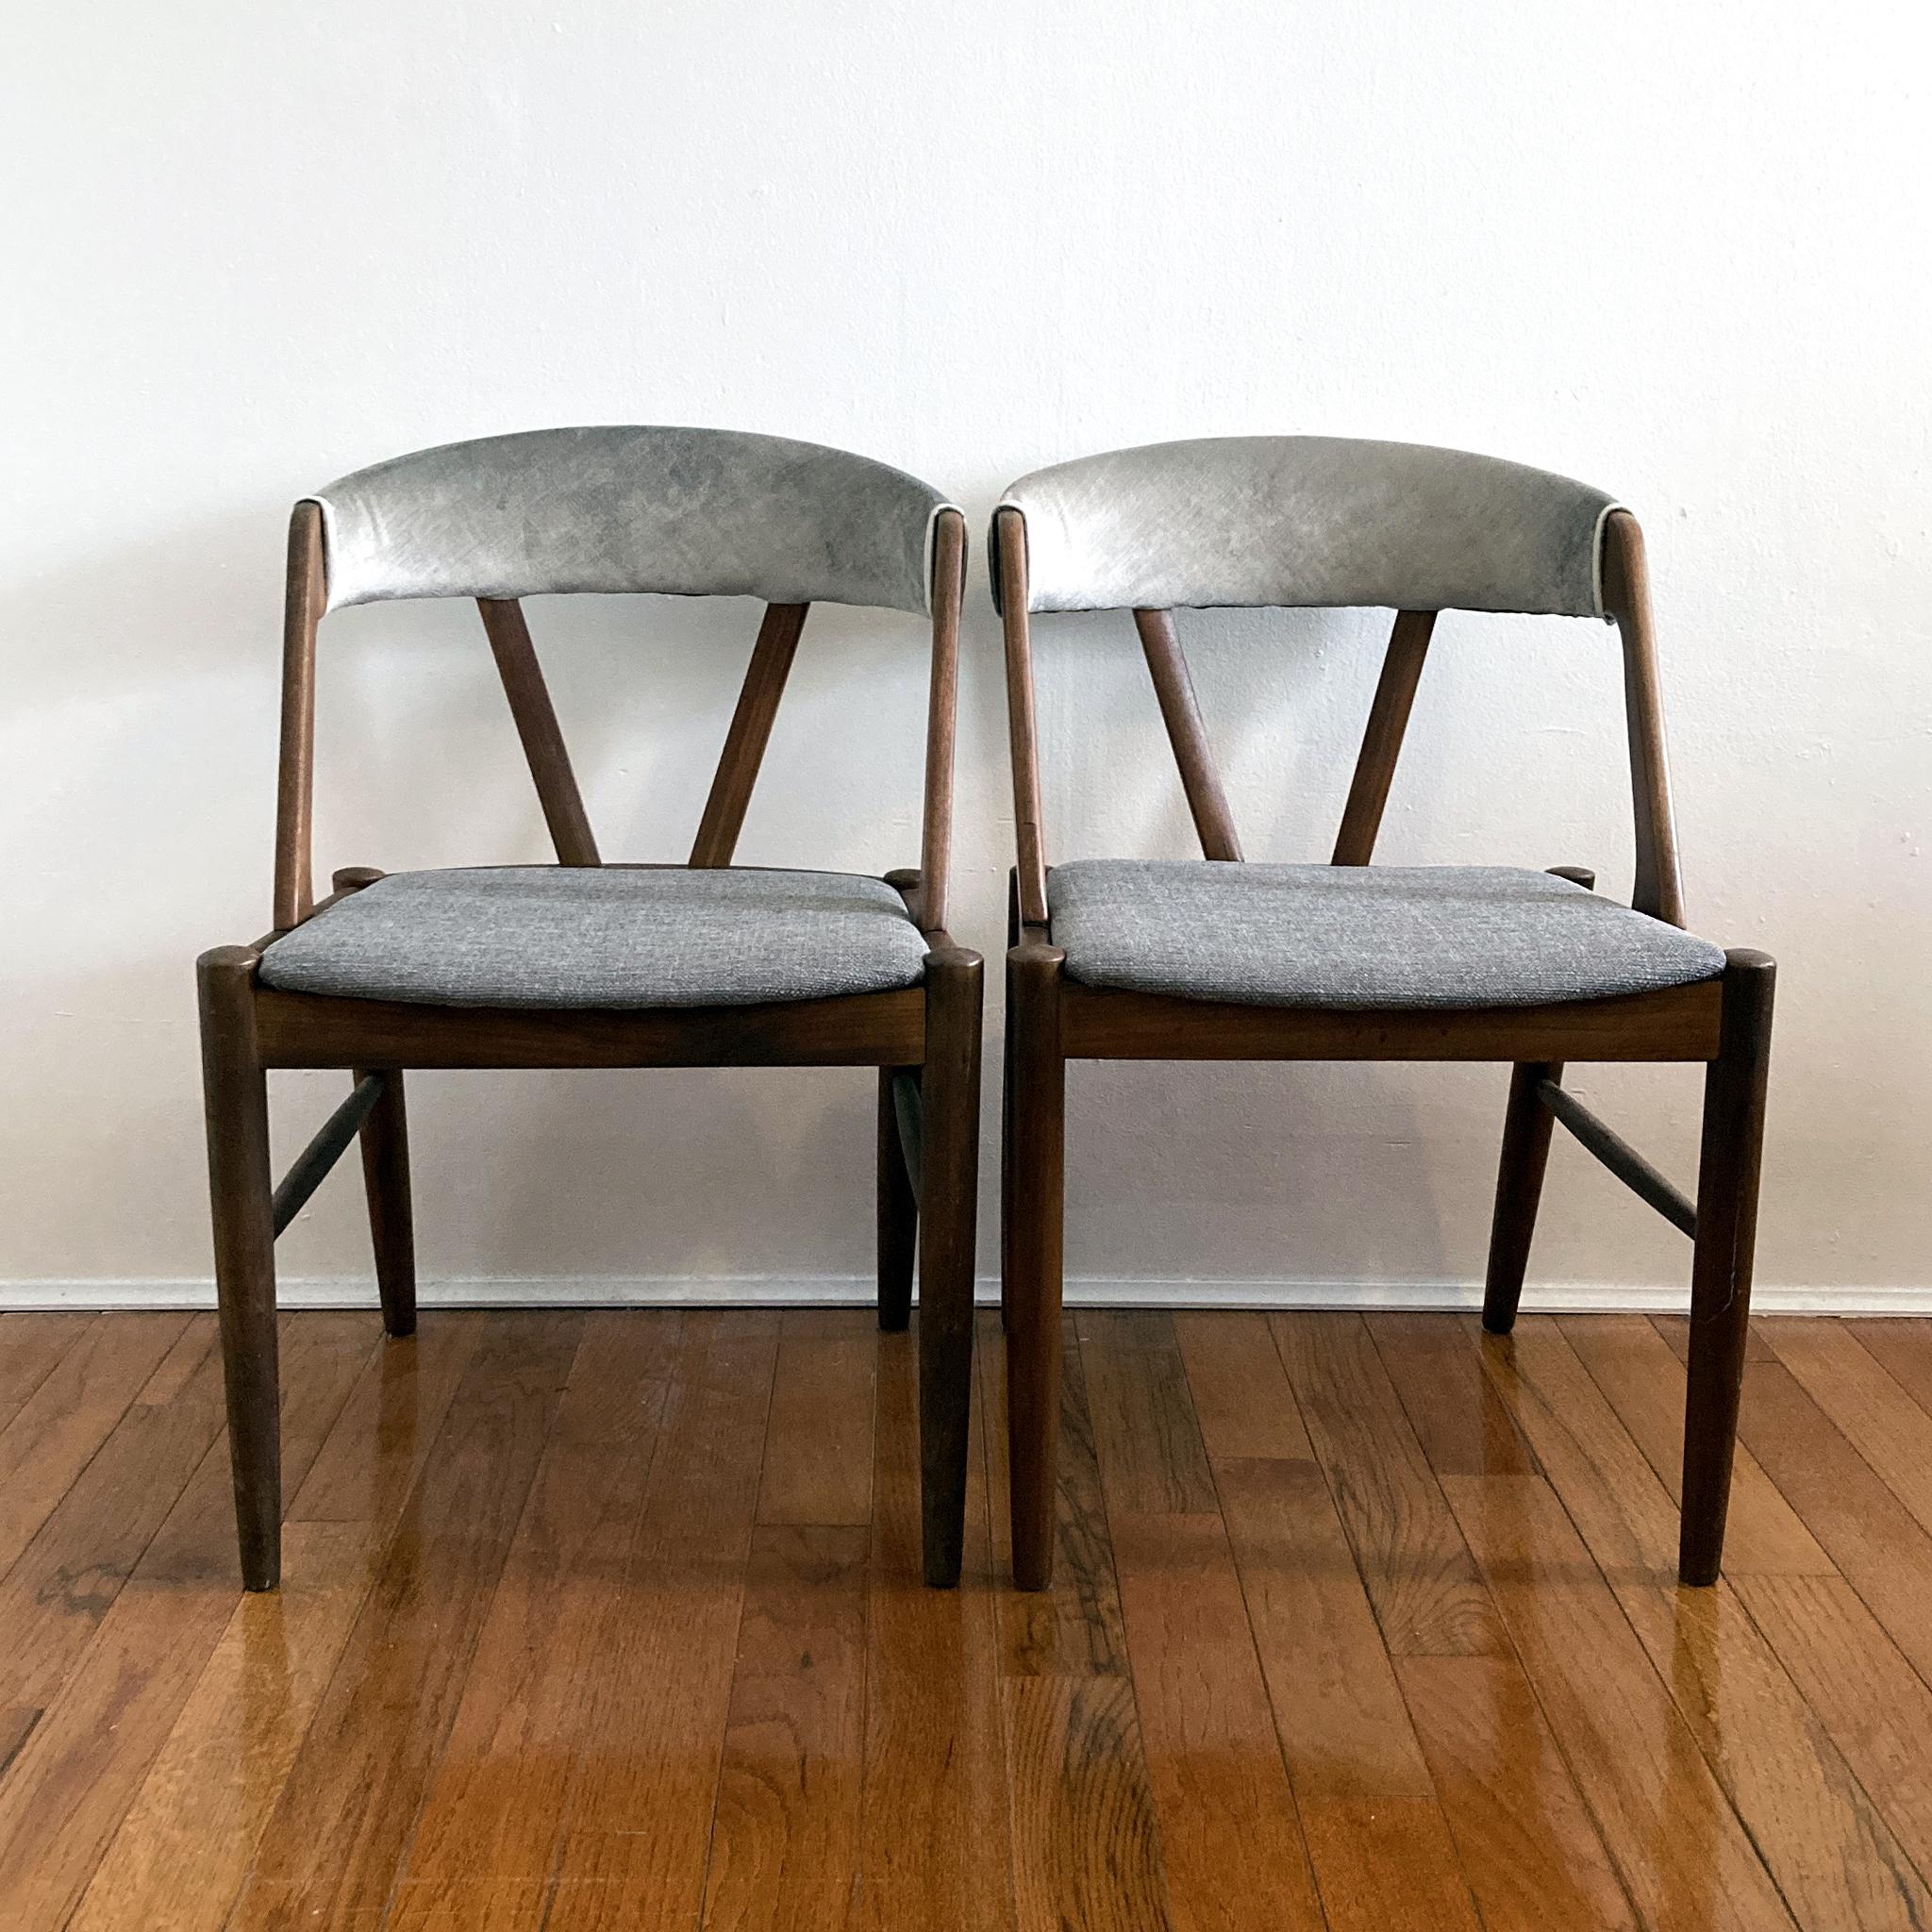 Pair of beautiful midcentury chairs in the style of Kai Kristiansen’s iconic Model 31 chair. Teak frame, new foam padding and reupholstered with grey tweed on the seat and grey velvet at the curved back. Great as side chairs or dining chairs.